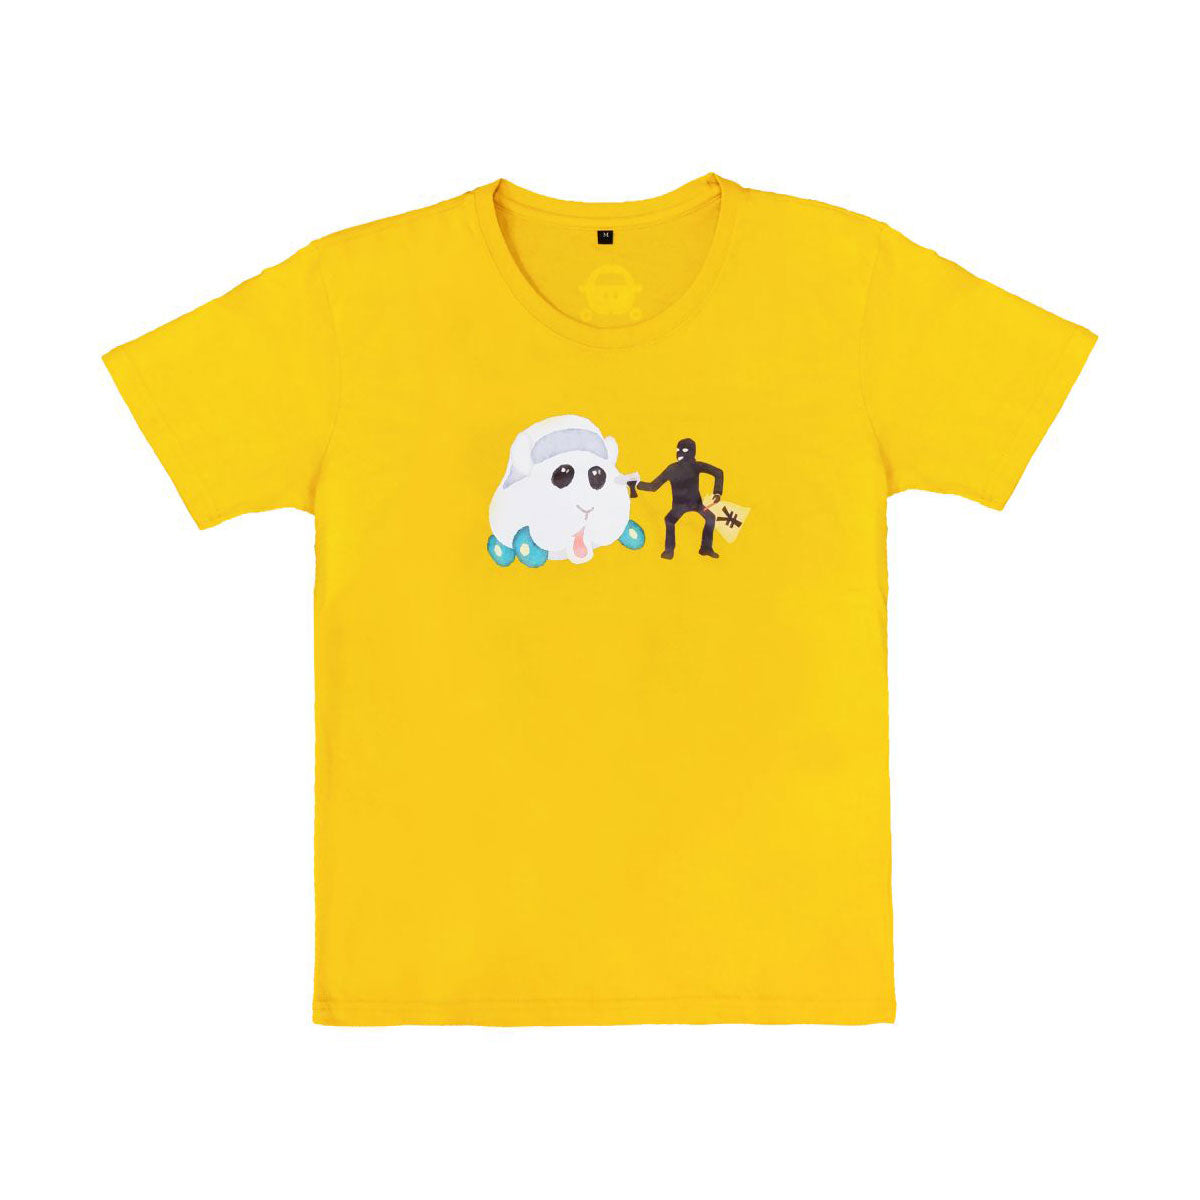 Pui Pui 天竺鼠車車 T-shirt 搶劫 黑色 服裝 Microworks Online Store